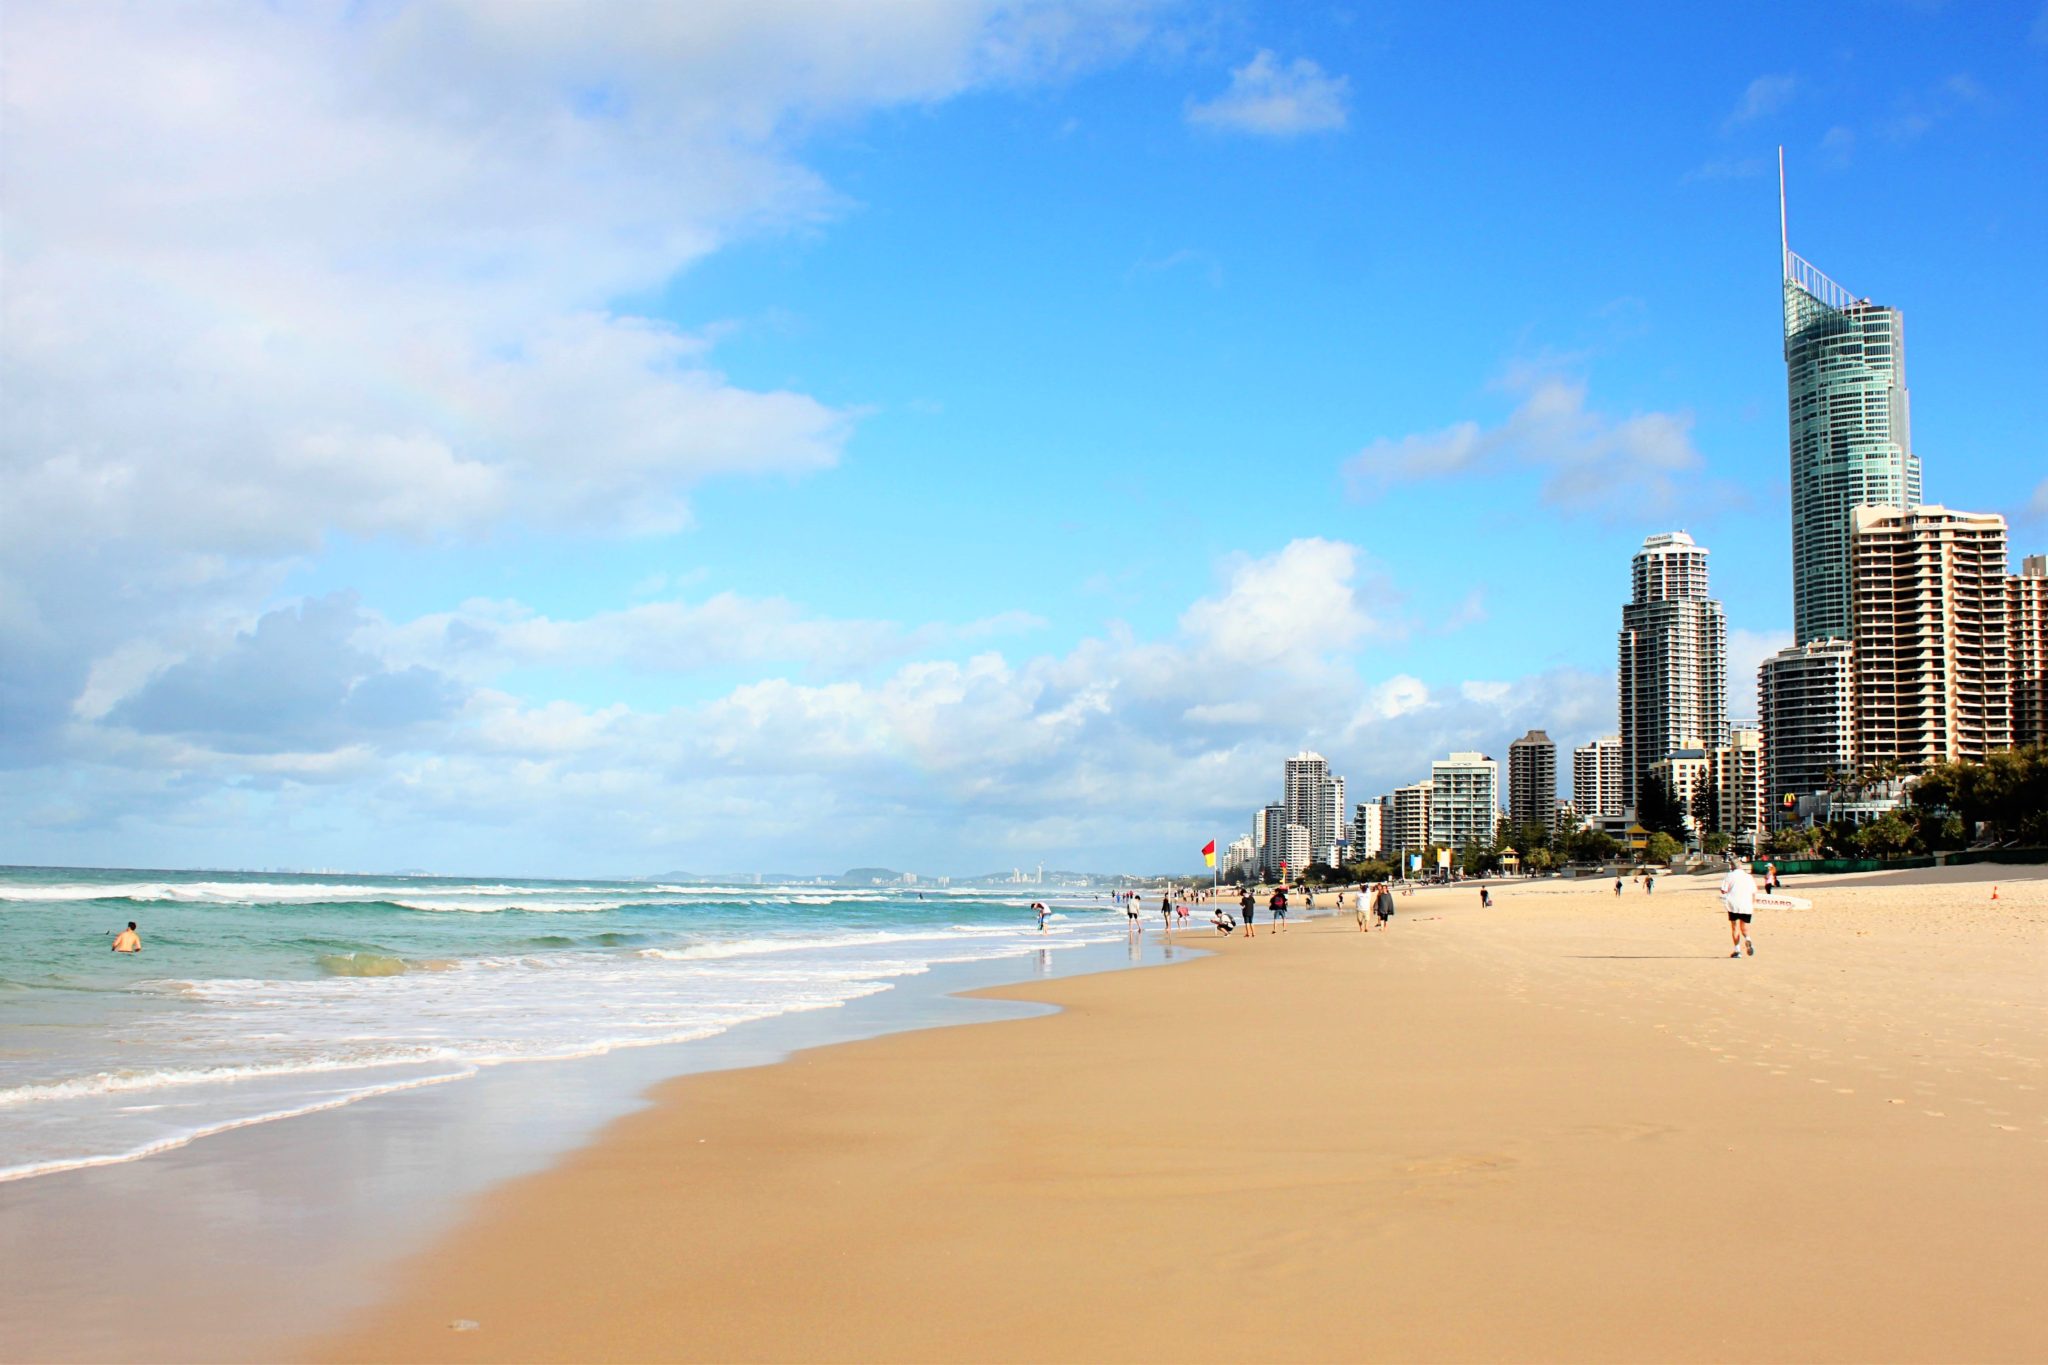 5 must see locations from the Gold Coast of Australia to the Sunshine Coast #australia #goldcoast #sunshinecoast #surfersparadisebeach #simplywander